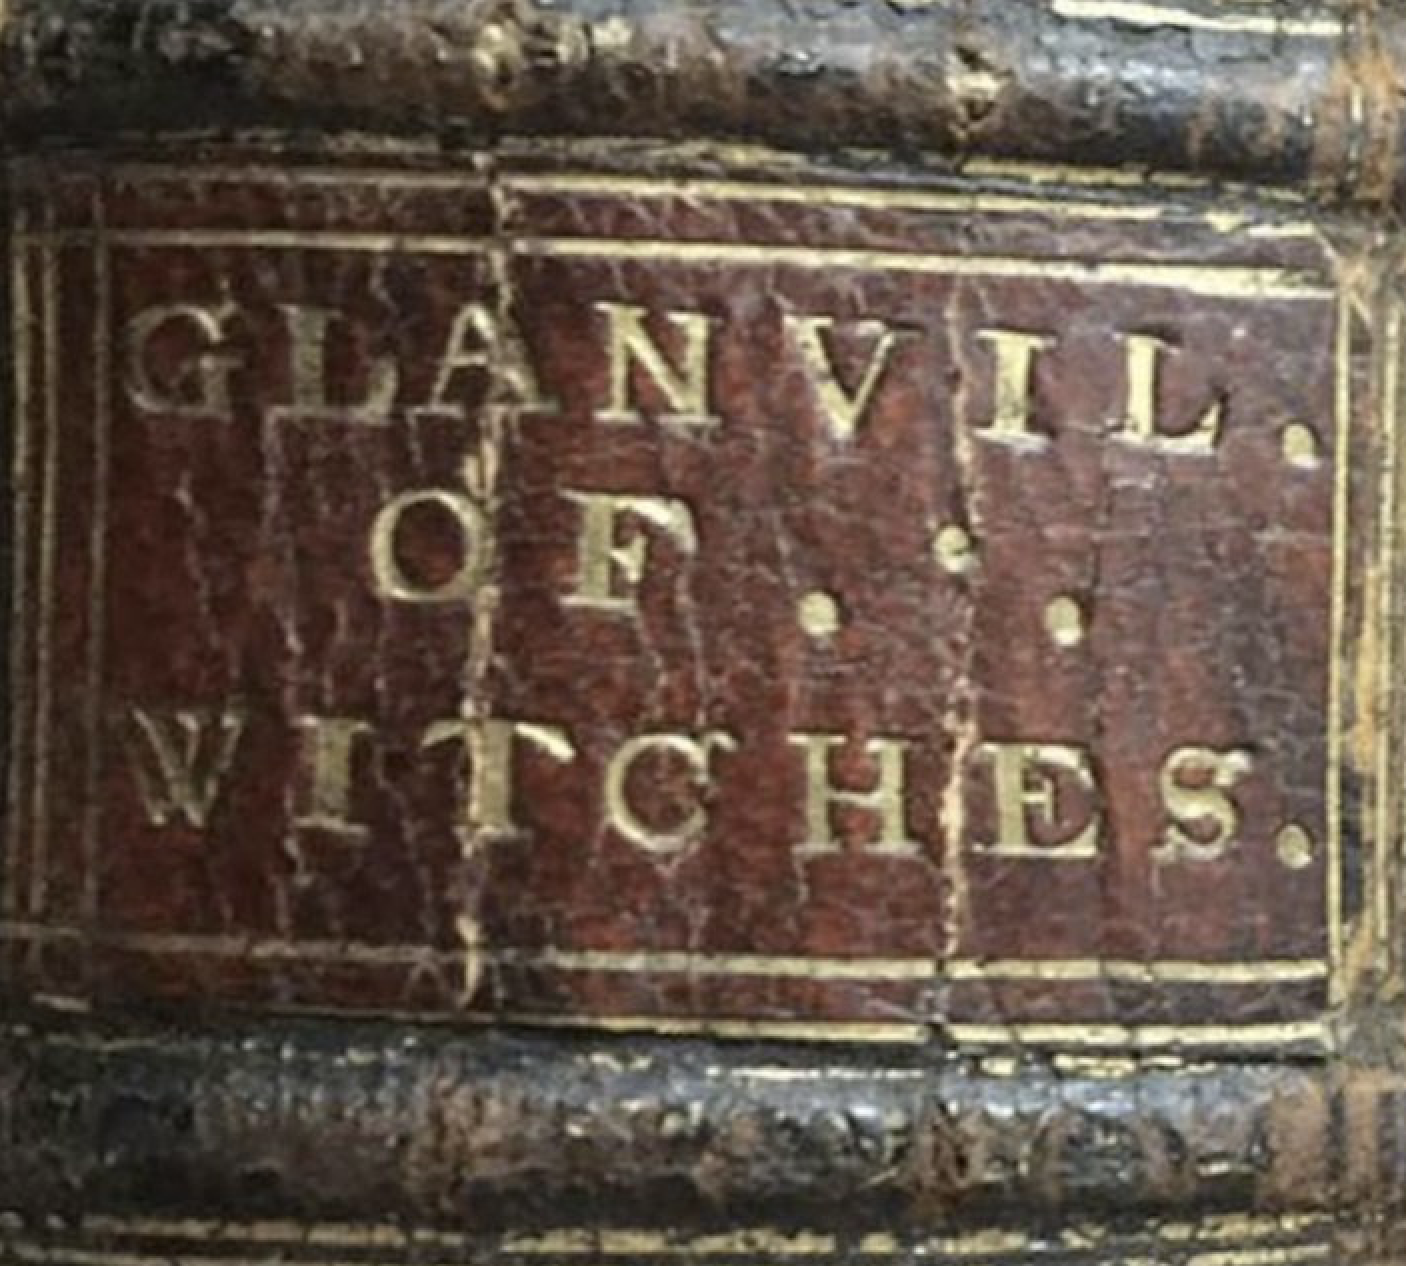 witches old book spine